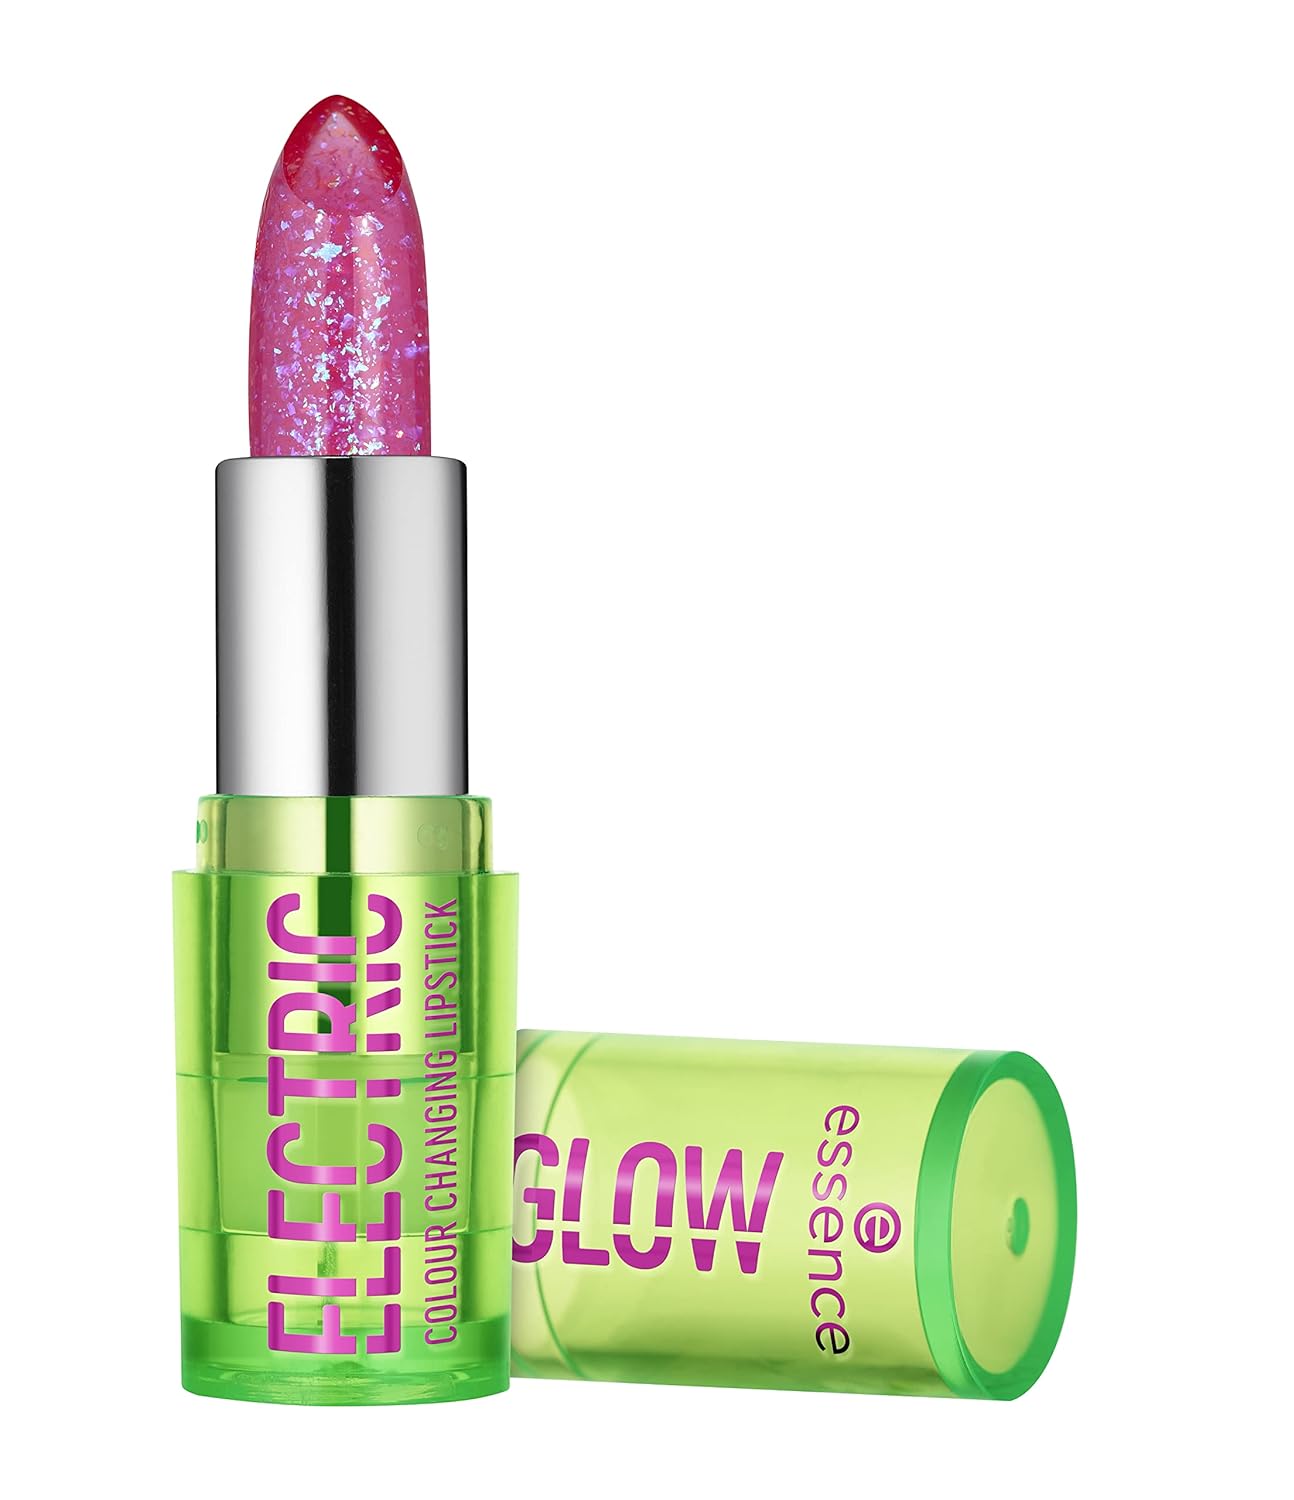 Essence Electric Glow Color Changing Lipstick, Transparent, Nourishing, Express Result, Color Adjusting, Natural, Glossy, Vegan, Oil-Free, Alcohol-Free, Paraben-Free, Pack of 1 (3.2 G)